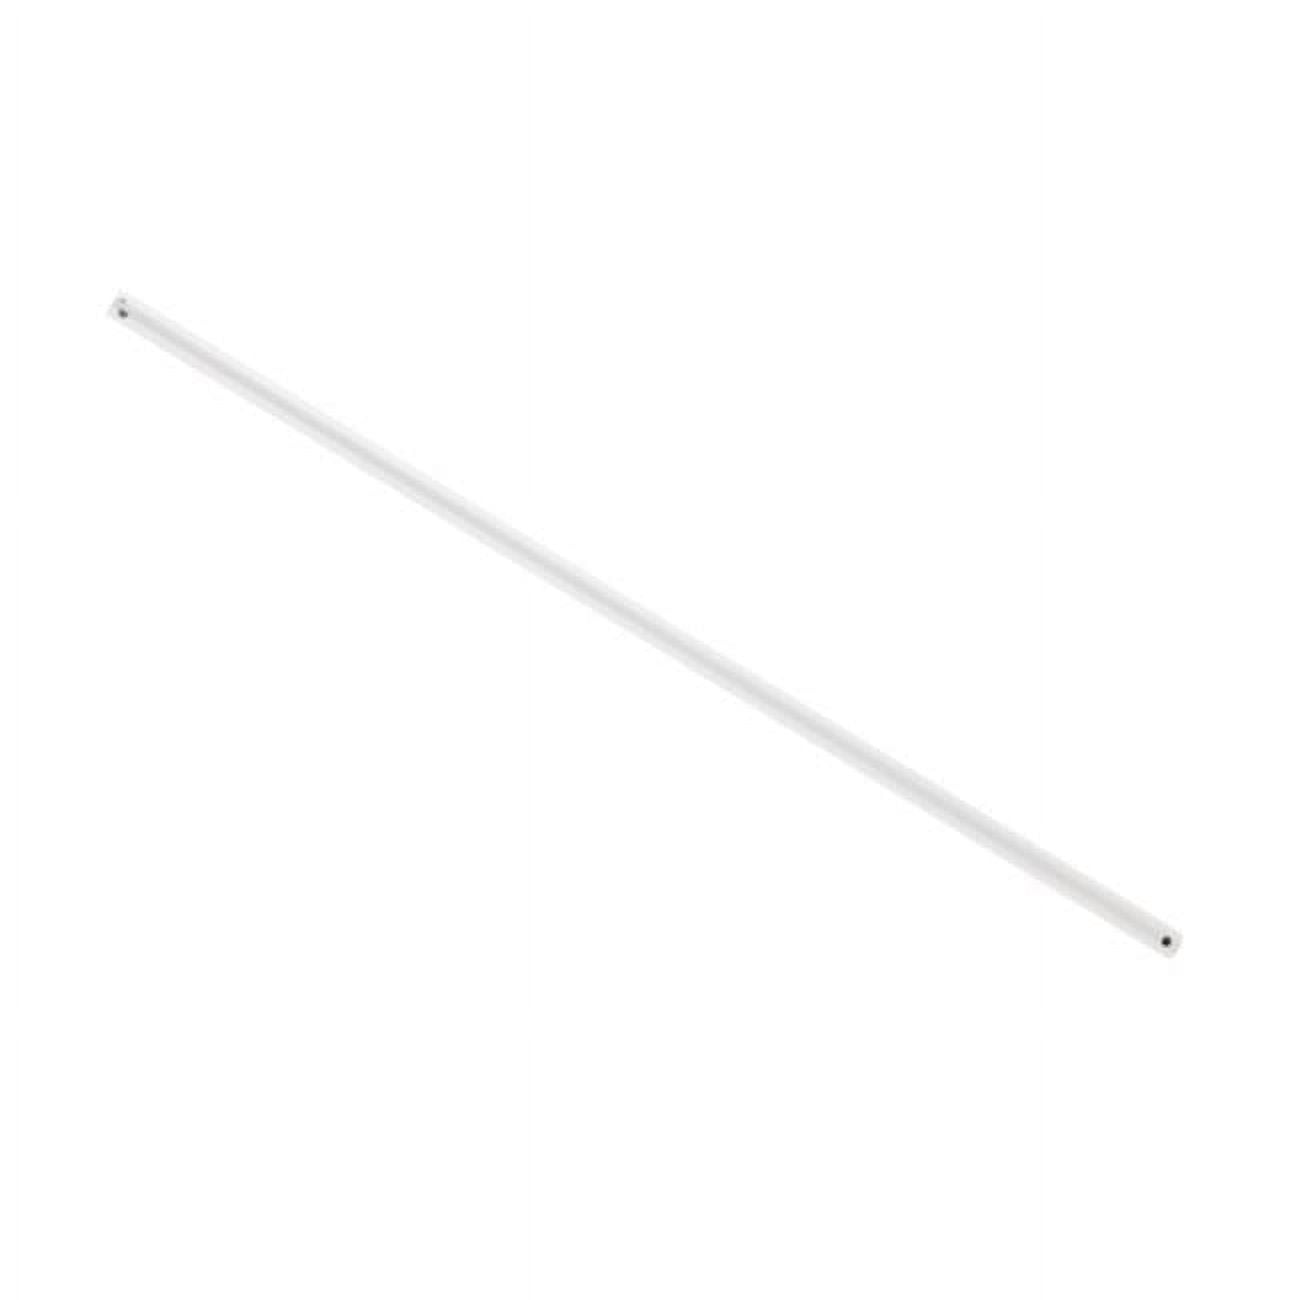 Picture of Lucci Air 21321836 Lucci Air Abyss White 36-inch Downrod